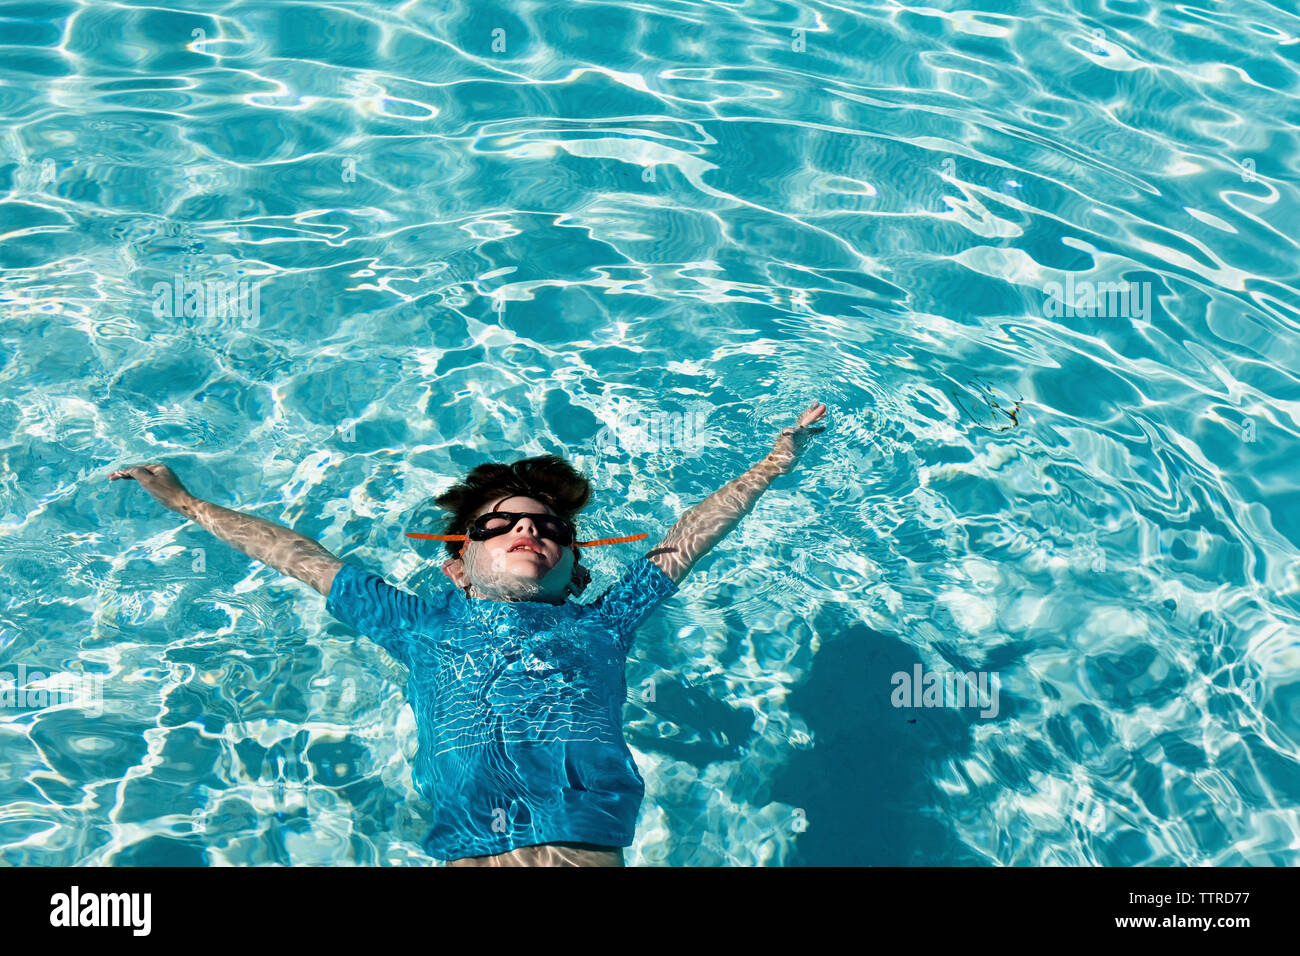 High angle view of boy with arms raised floating on water in swimming pool Stock Photo